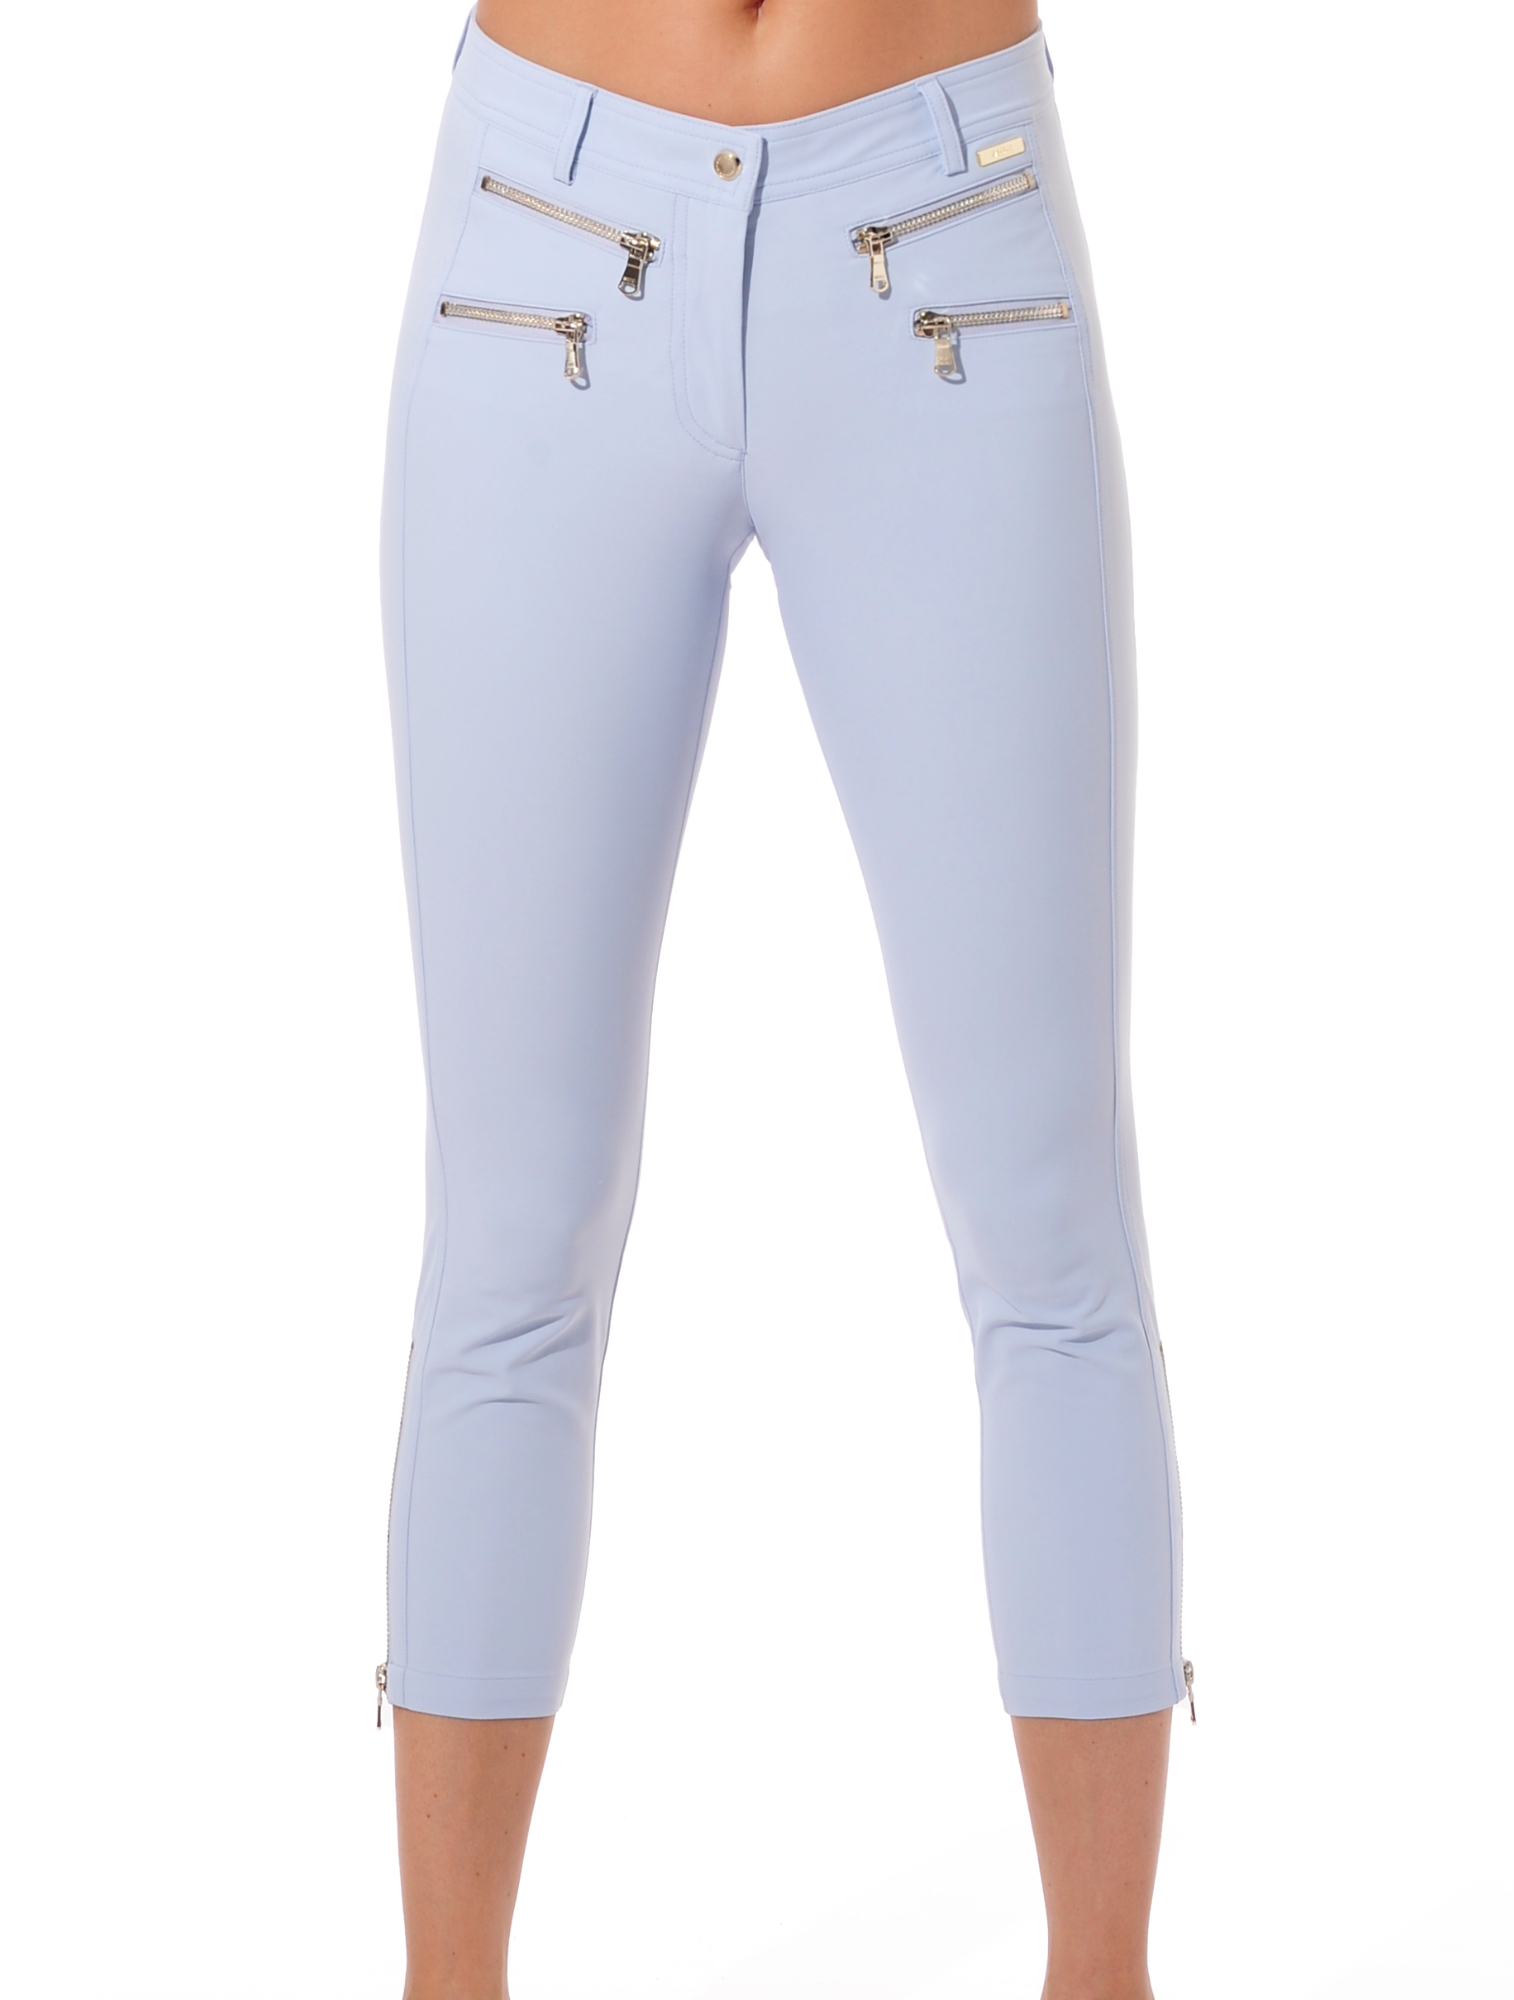 4way stretch double zip cropped pants cloud 